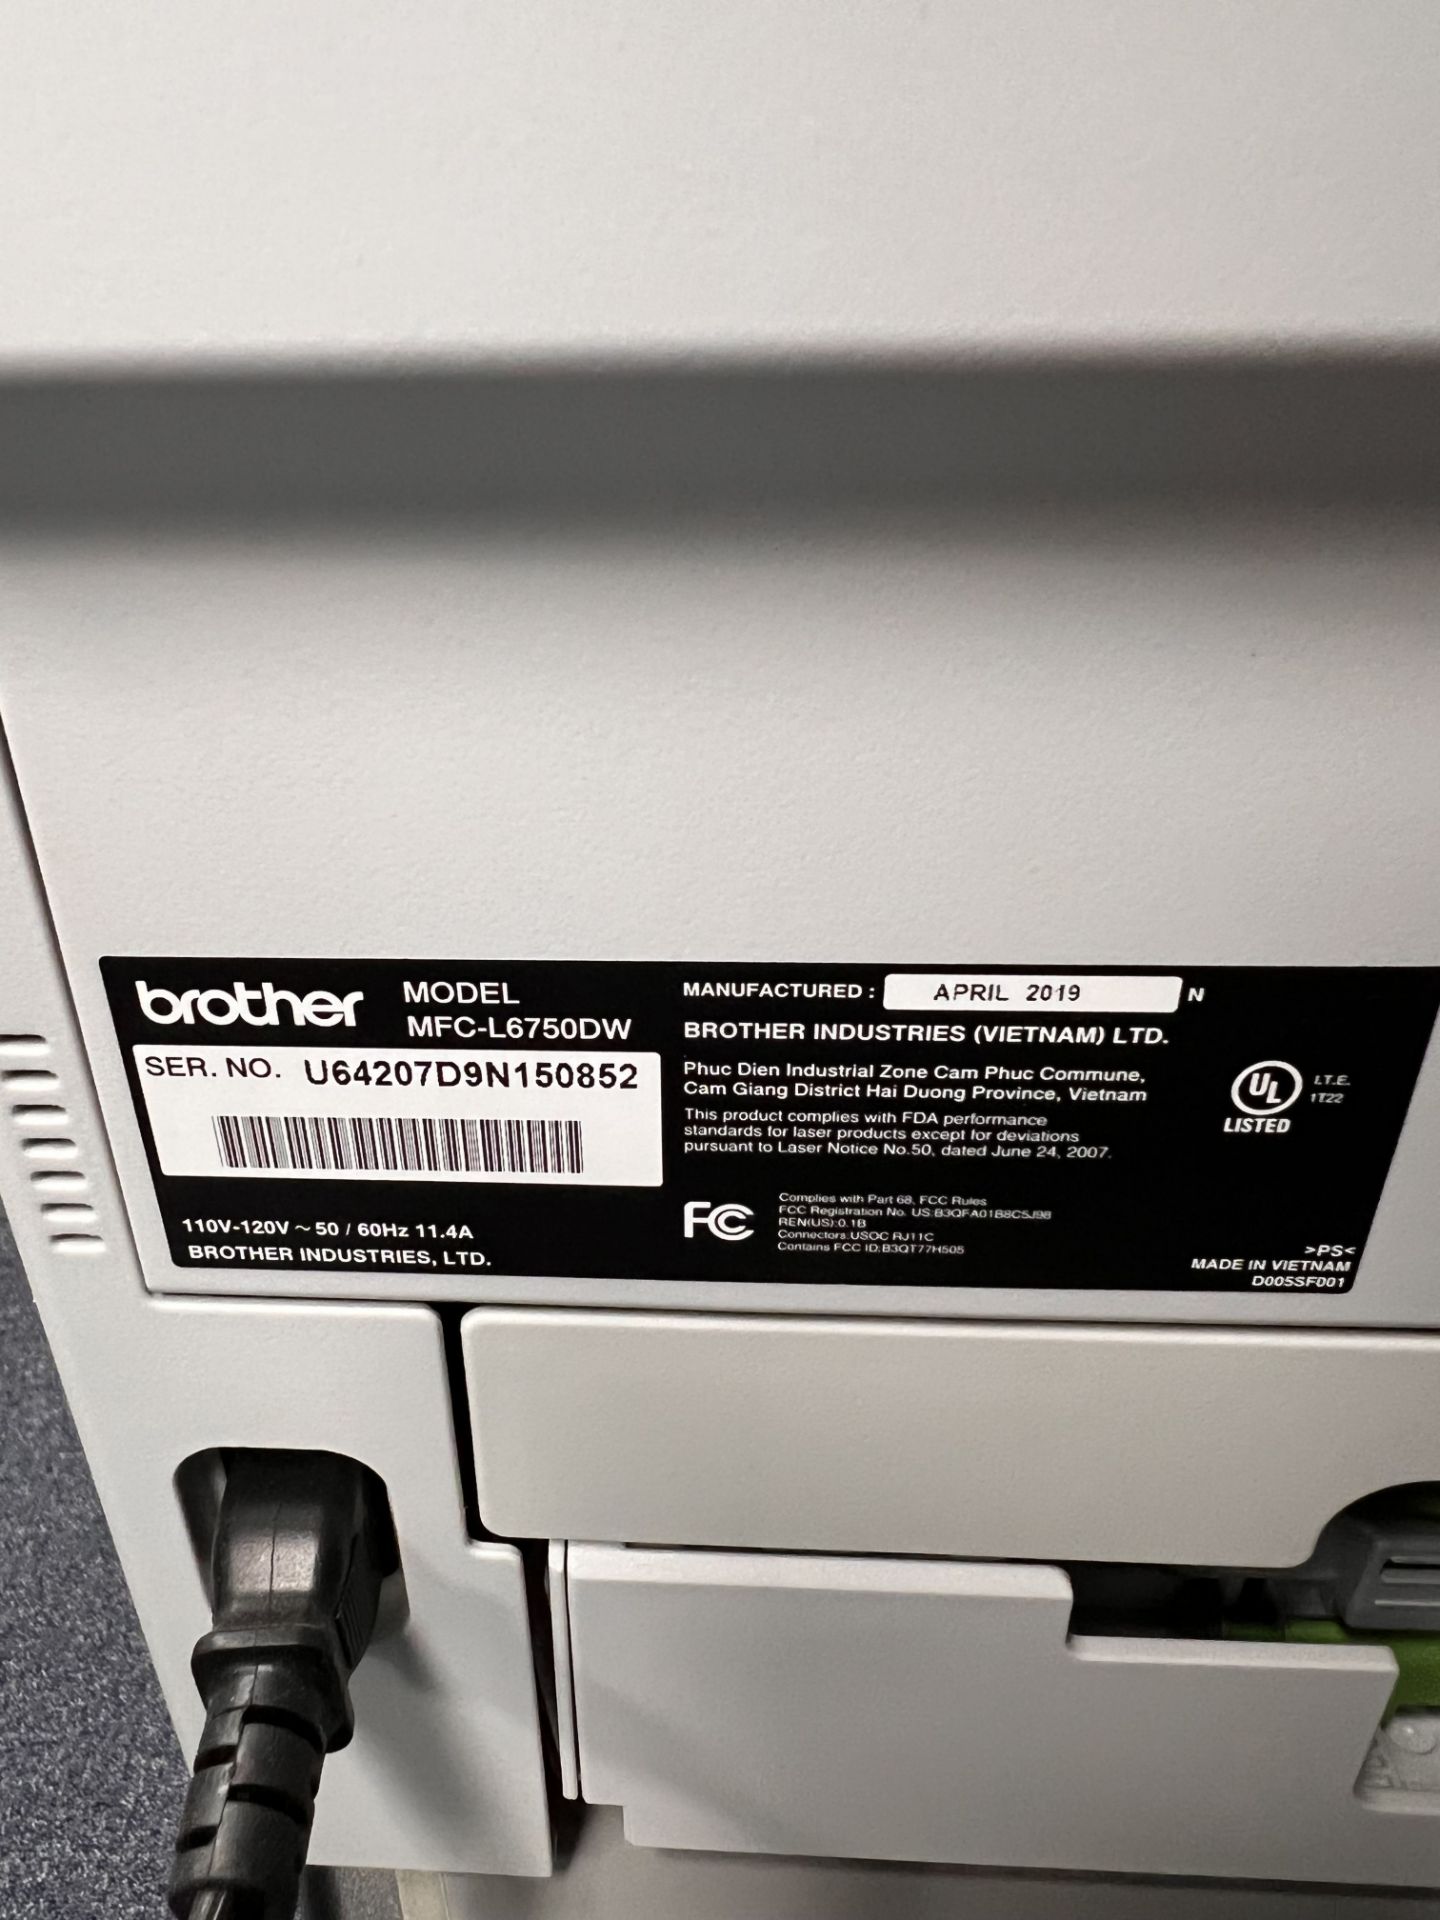 BROTHER MFC-L6750DW COPIER/PRINTER - Image 5 of 5